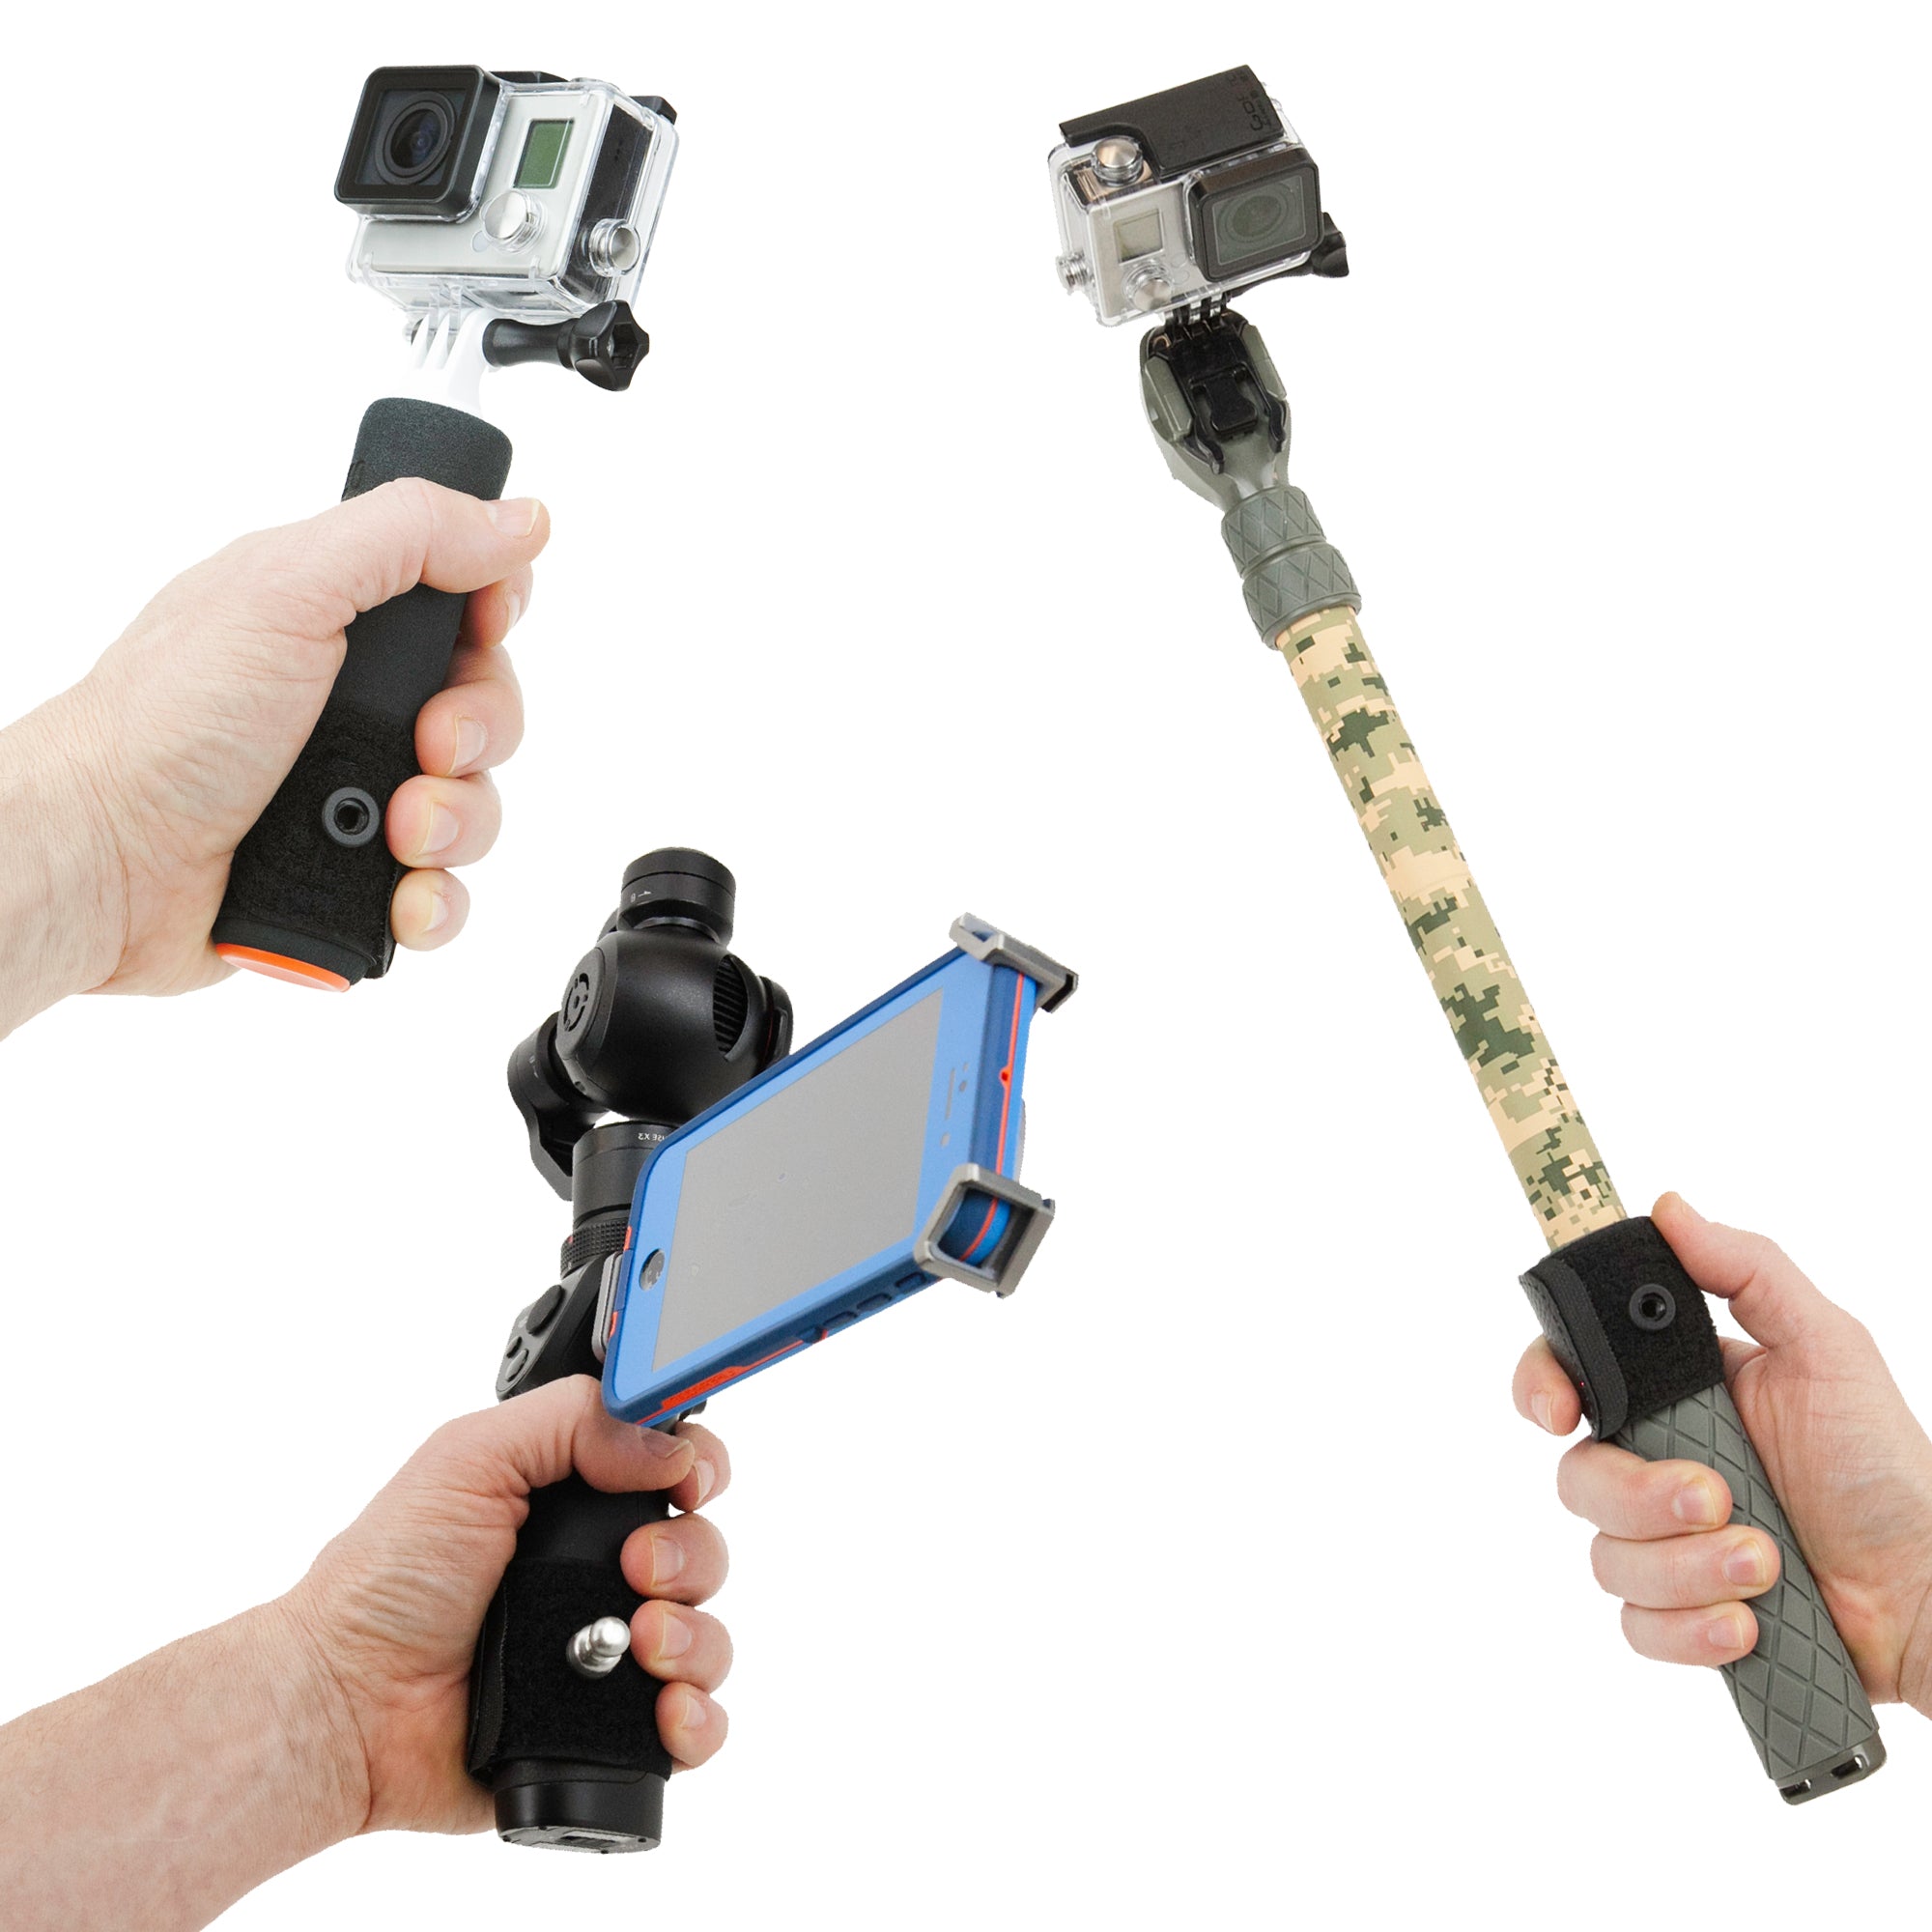 Spider Gimbal Grips